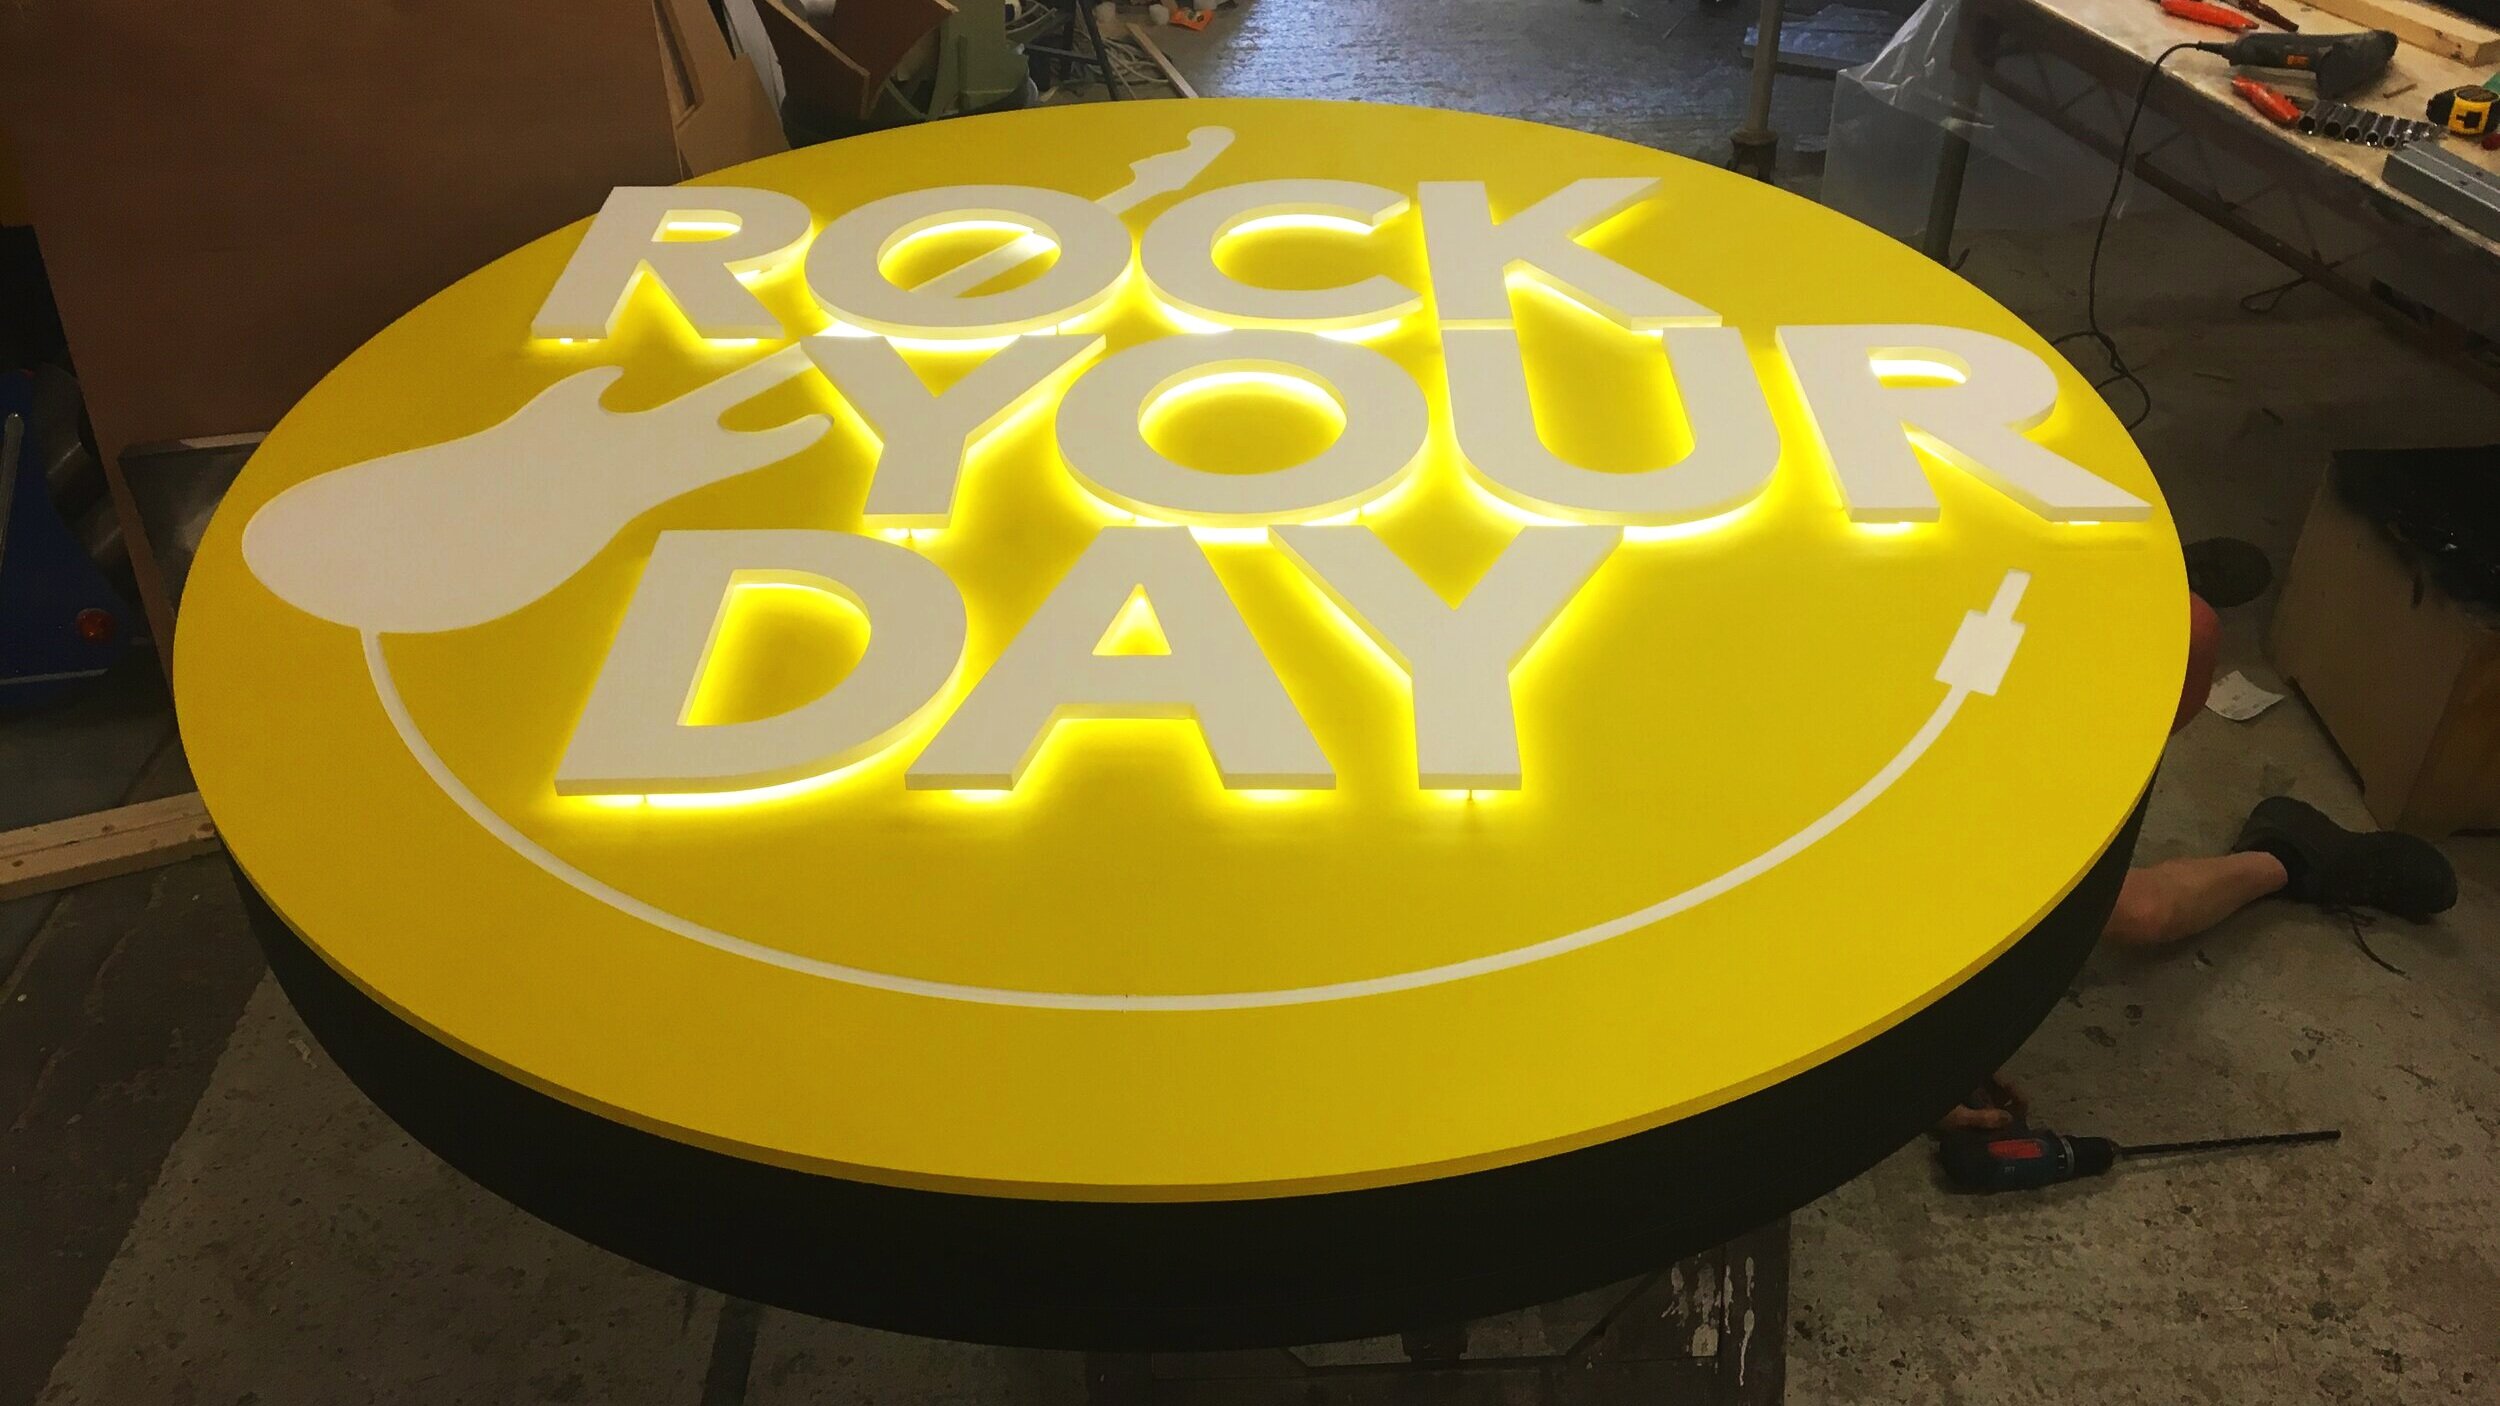 Rock Your Day - Illuminated sign